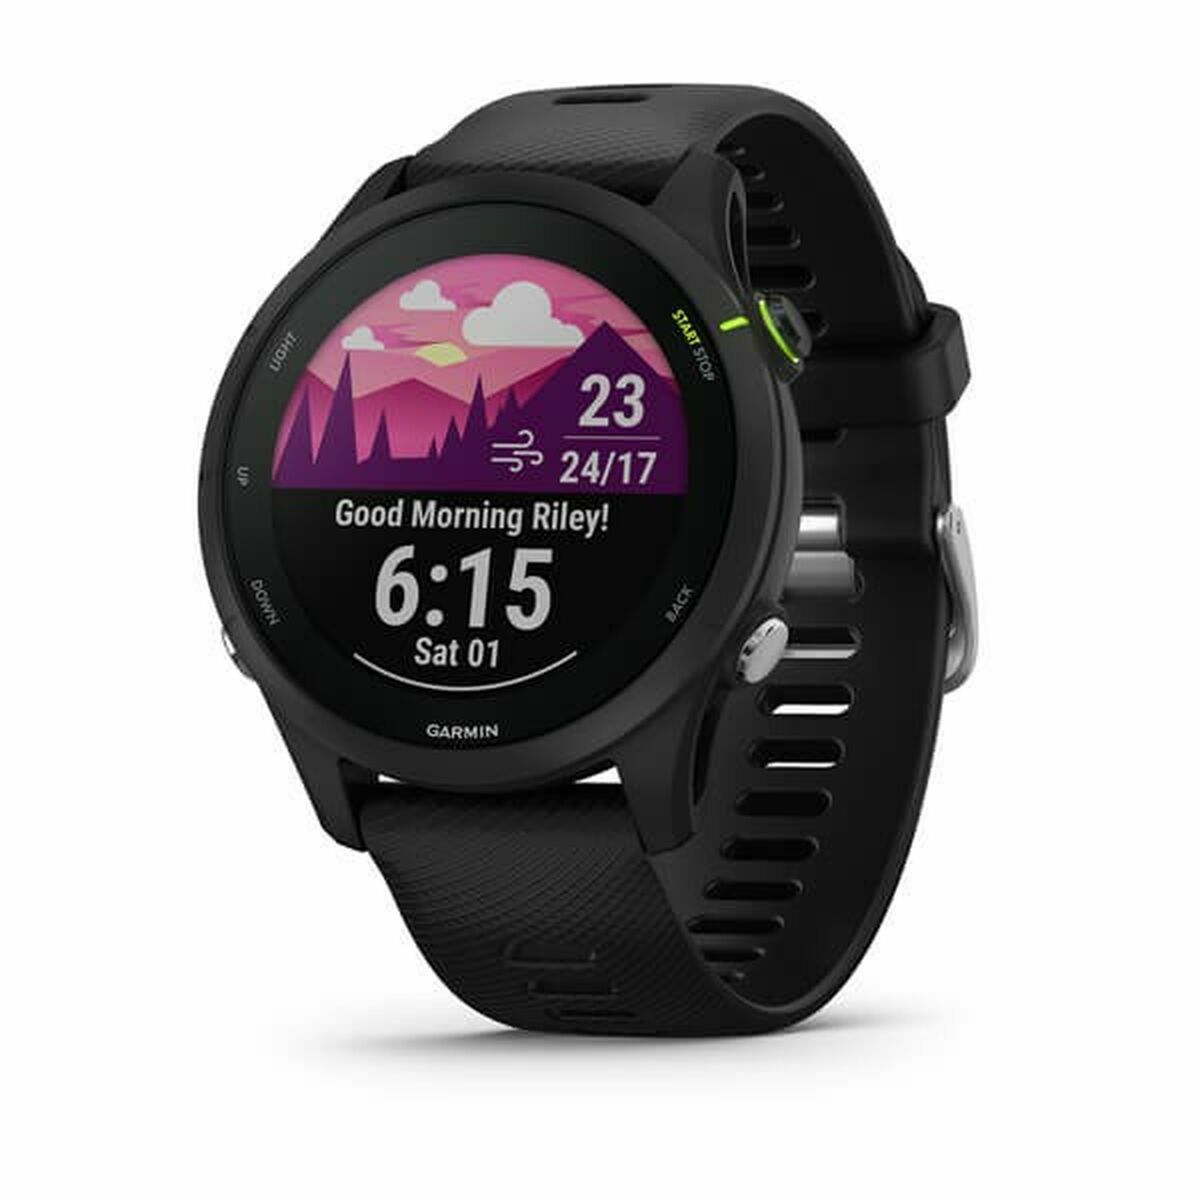 Smartwatch GARMIN Forerunner 255 Black 1,3" Ø 46 mm, GARMIN, Electronics, smartwatch-garmin-forerunner-255-black-1-3-o-46-mm, Brand_GARMIN, category-reference-2609, category-reference-2617, category-reference-2634, category-reference-t-19653, category-reference-t-4082, Condition_NEW, original gifts, Price_300 - 400, telephones & tablets, Teleworking, wifi y bluetooth, RiotNook